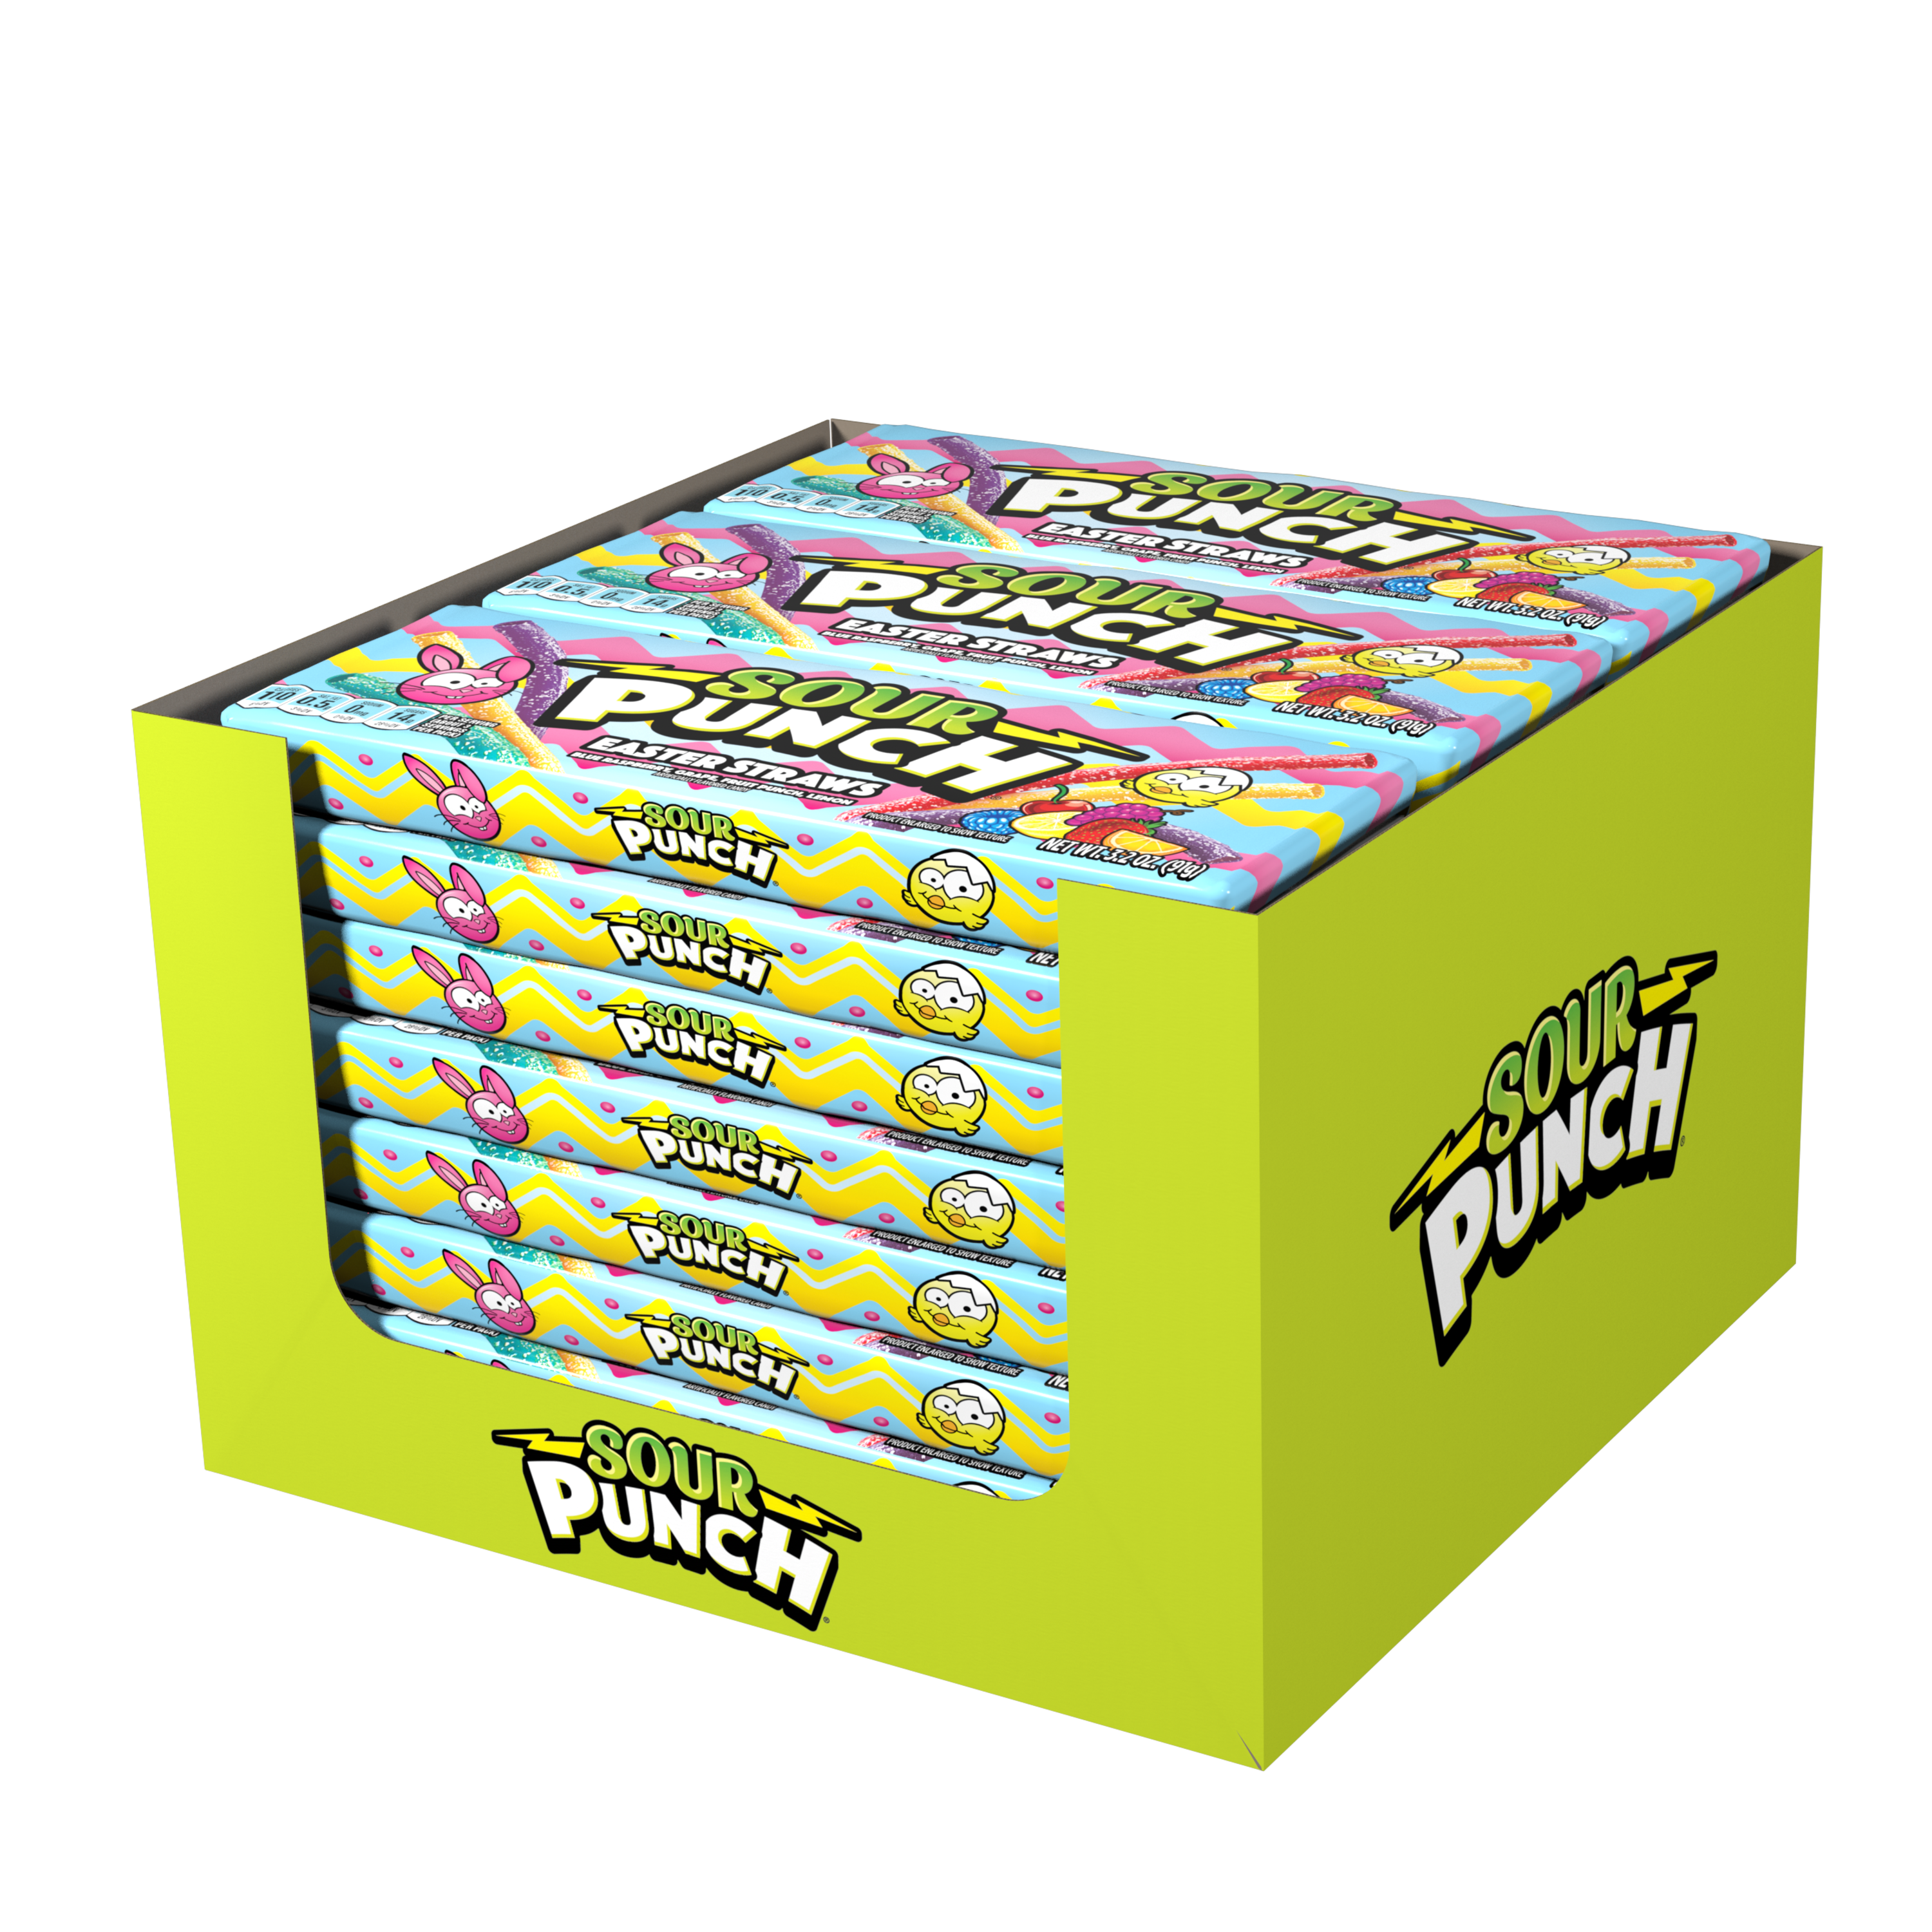 SOUR PUNCH Easter Candy Straws 24-pack of 3.2oz trays